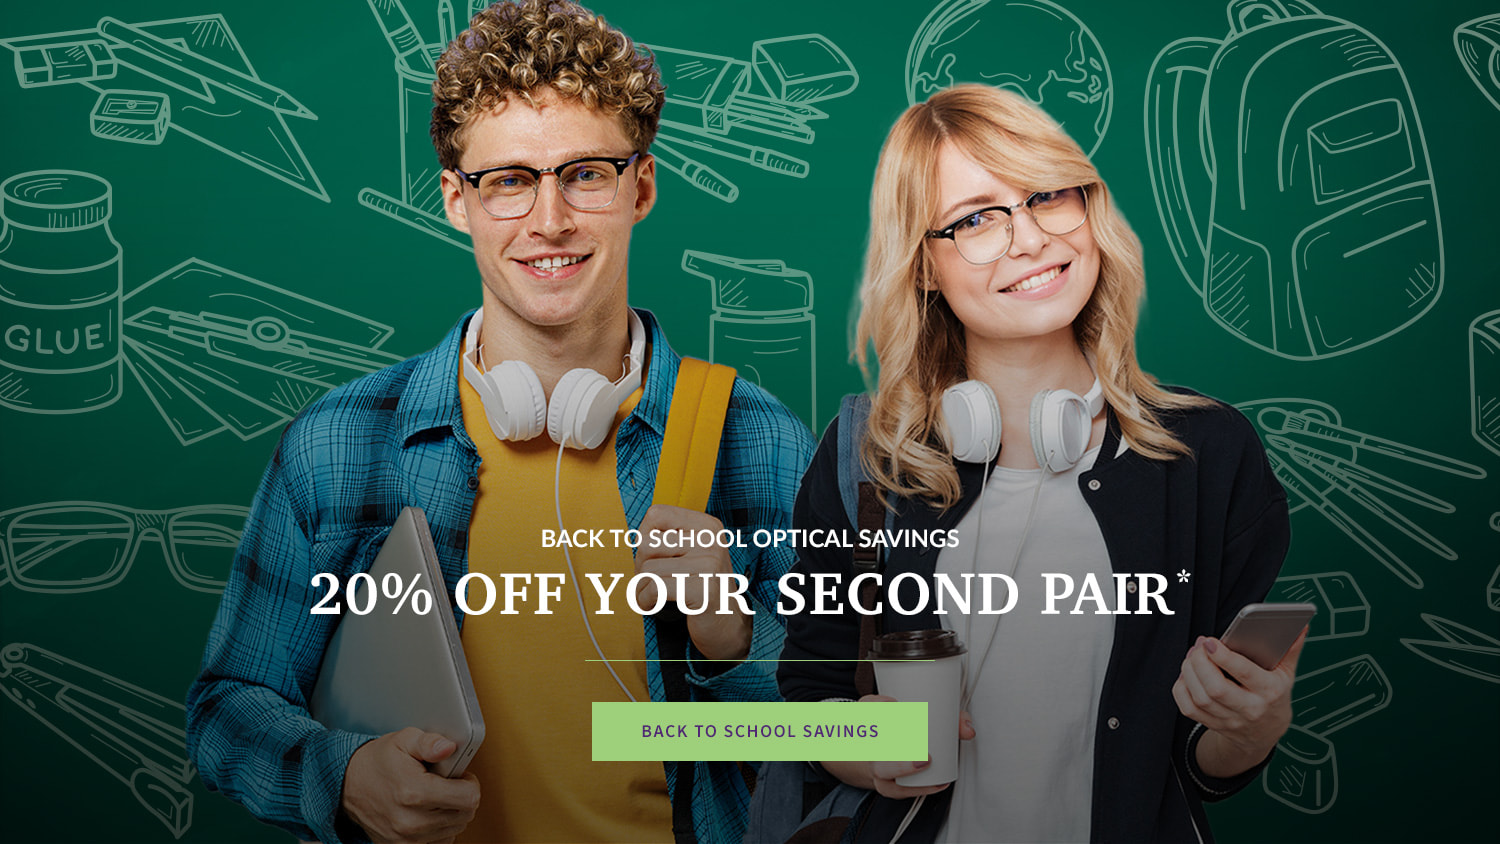 BACK TO SCHOOL OPTICAL SAVINGS 20% OFF YOUR SECOND PAIR*